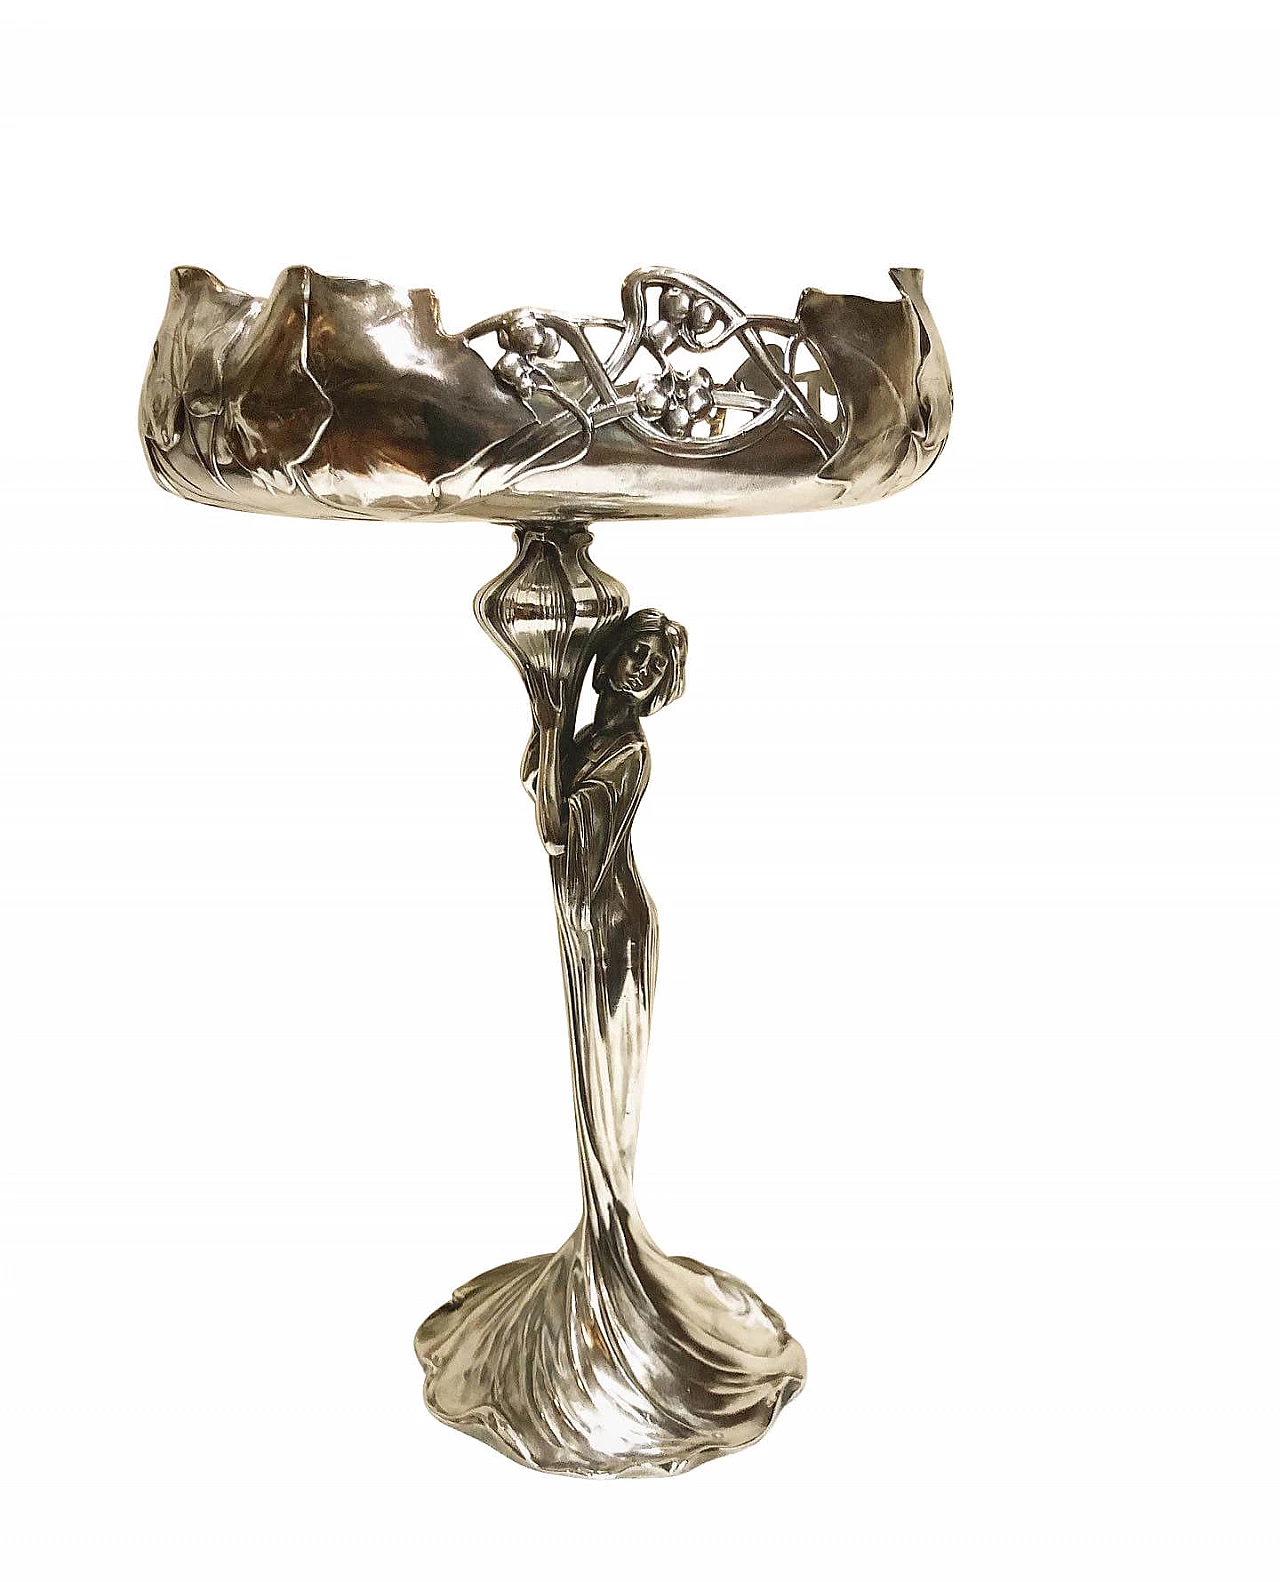 W.M.F. fruit stand in silvered metal, early 20th century 1261094